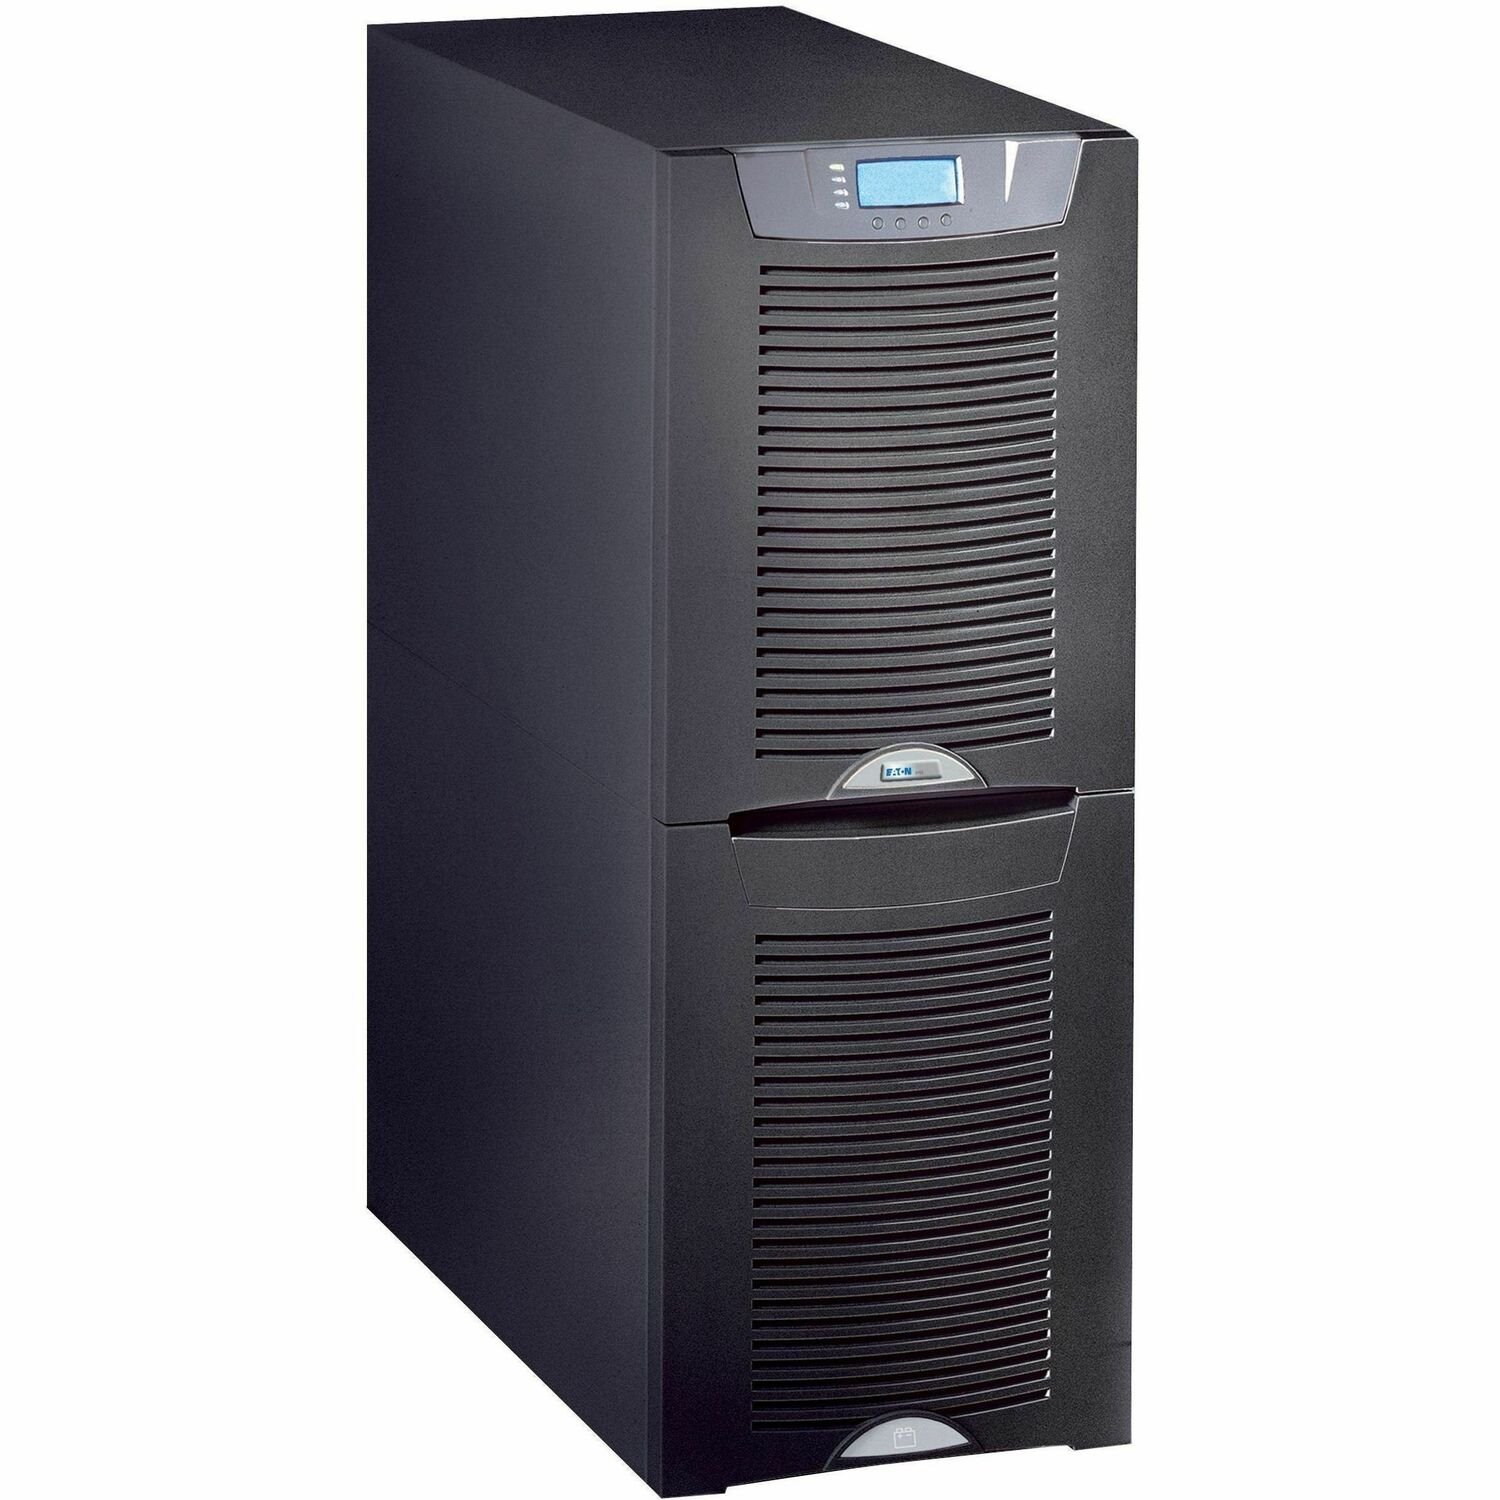 Eaton 915515IN15 Double Conversion Online UPS - 15 kVA - Single Phase